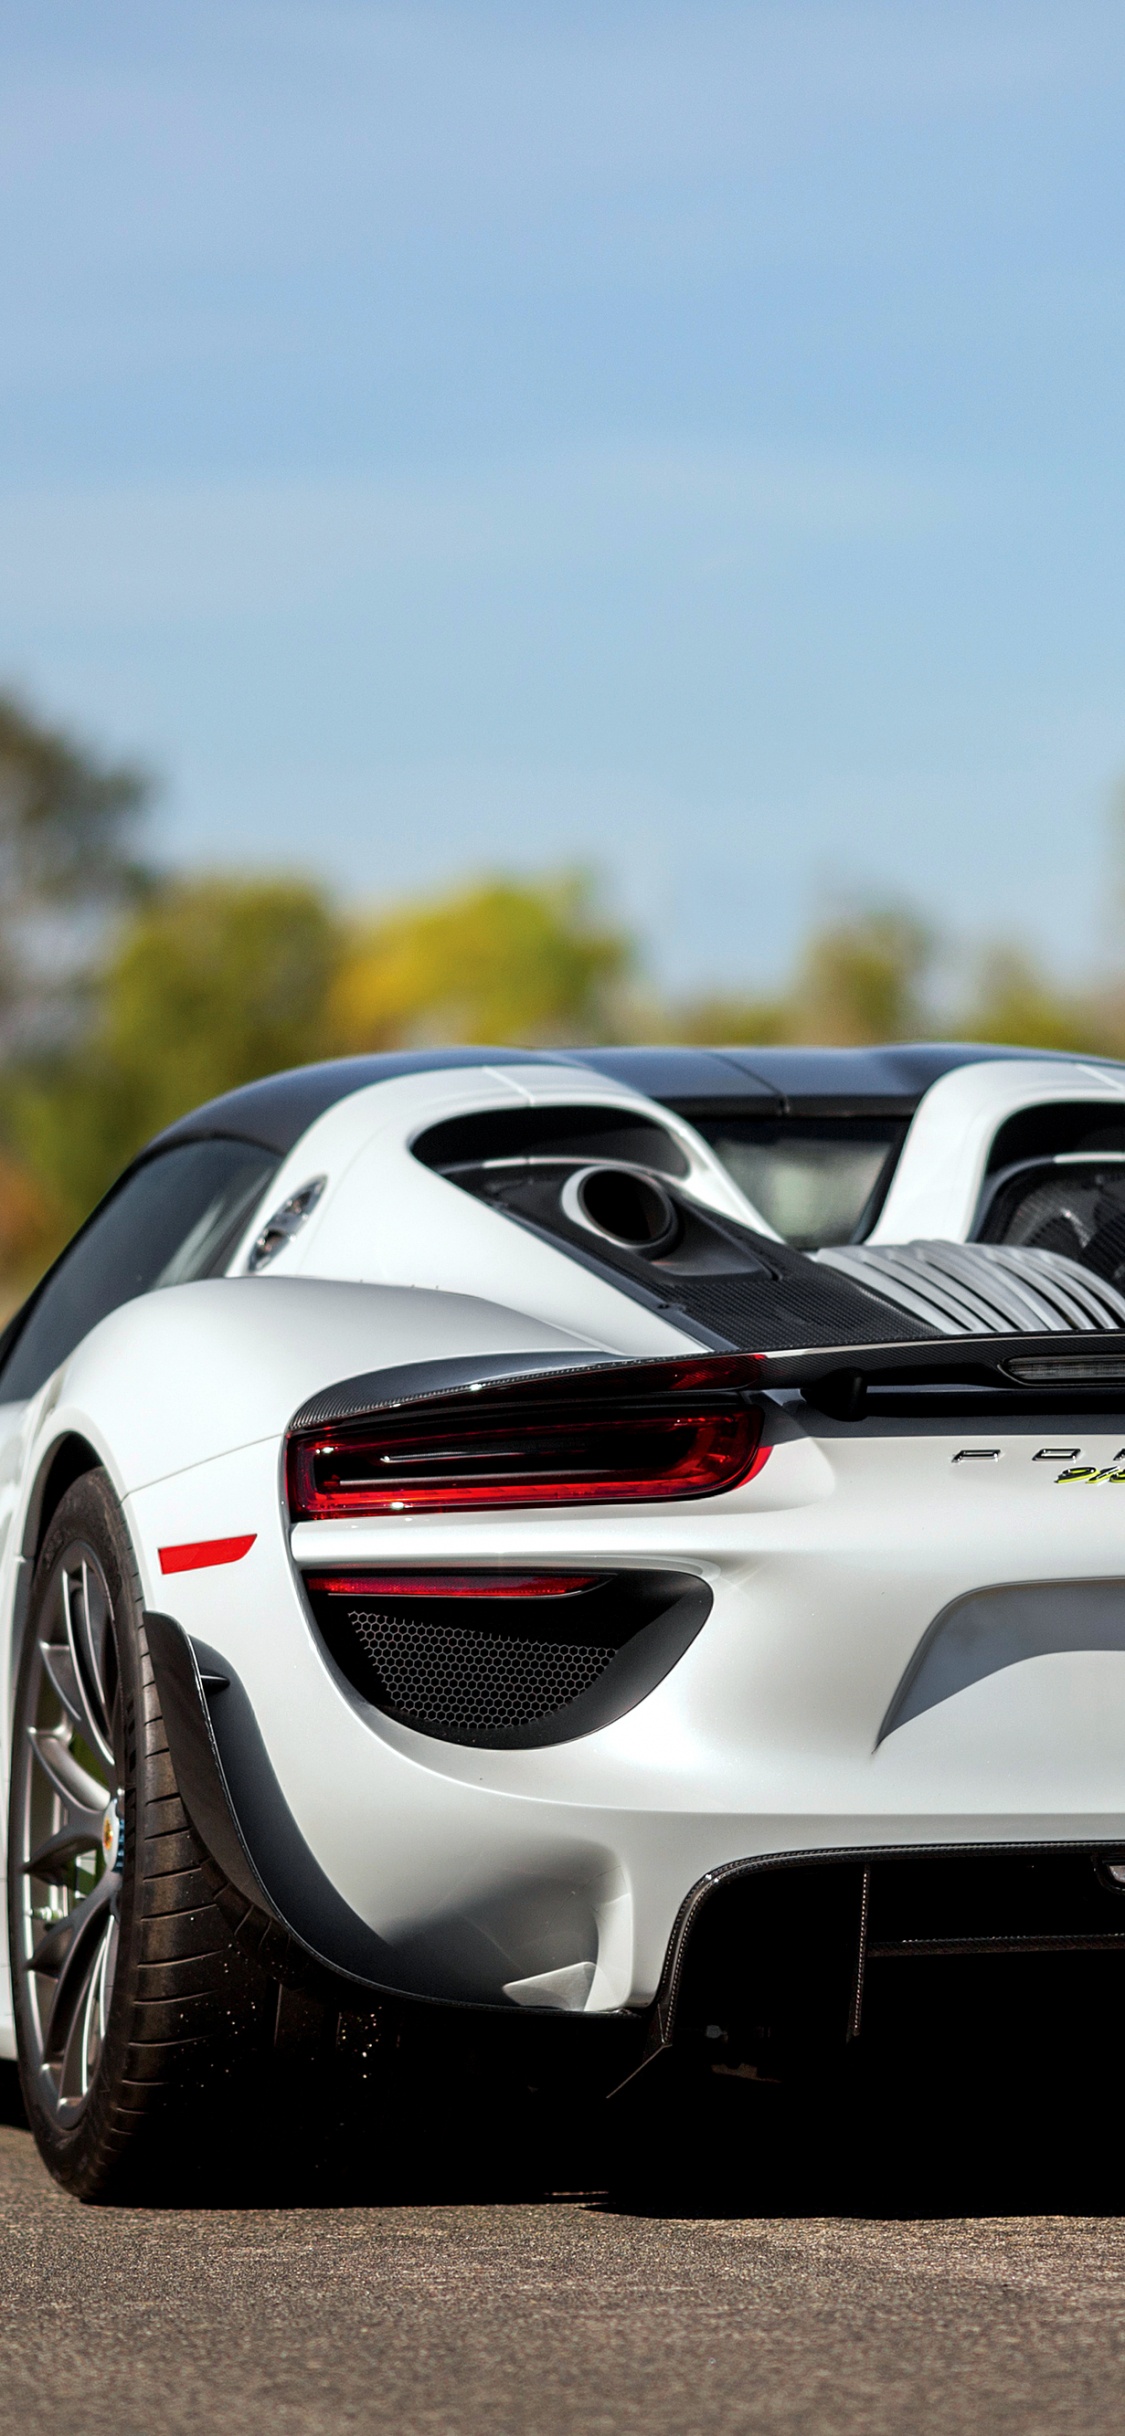 Premium AI Image | A porsche 918 is parked on a road in the rain.